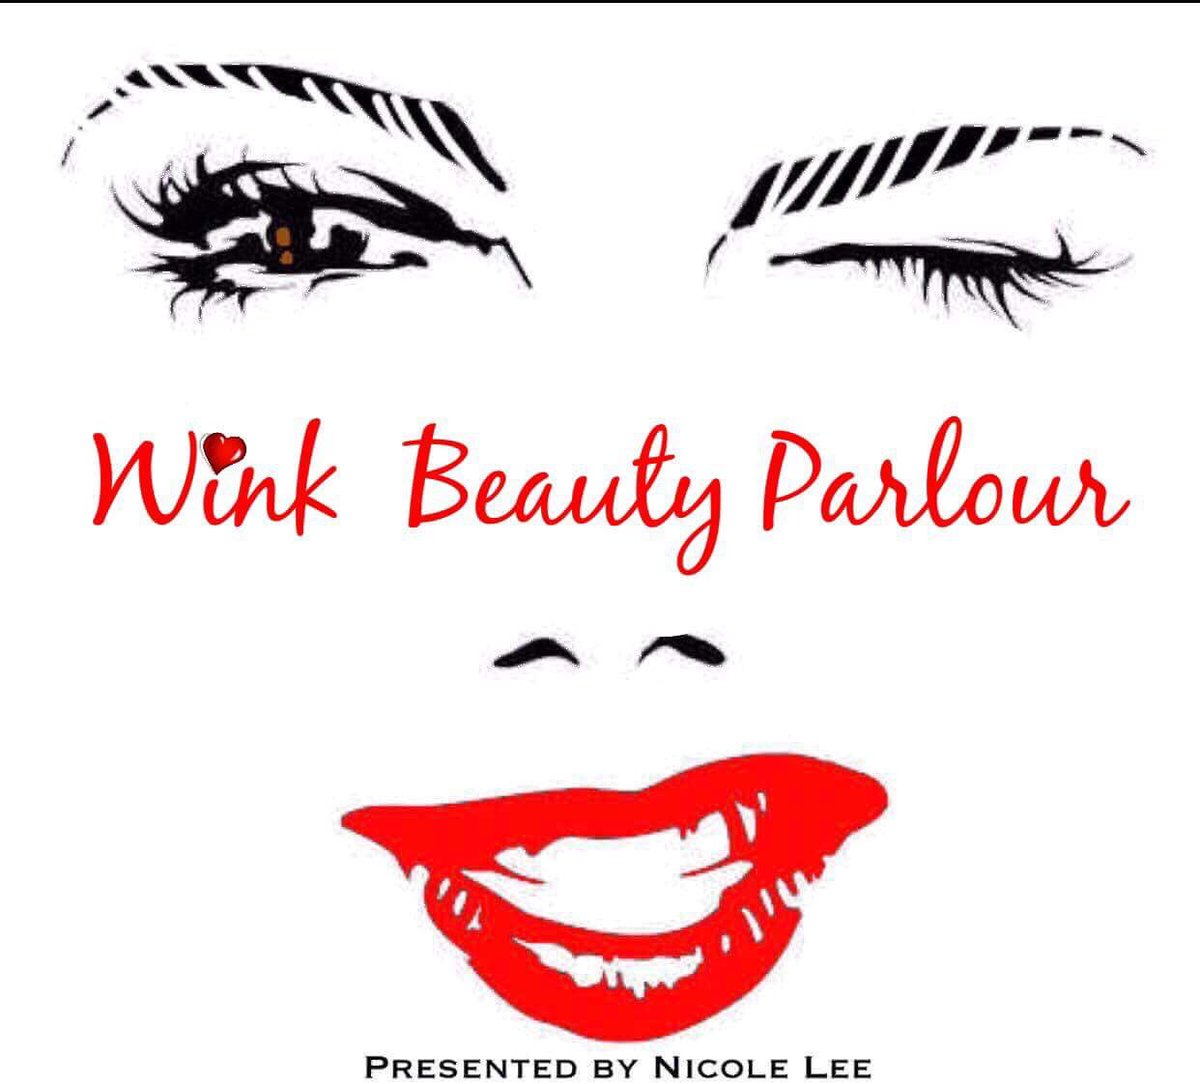 Open slots available for make up and eyelash extensions #winkbeautyparlour #nyclashtech #makeupartist #beautystudio #queens #brooklyn #longisland